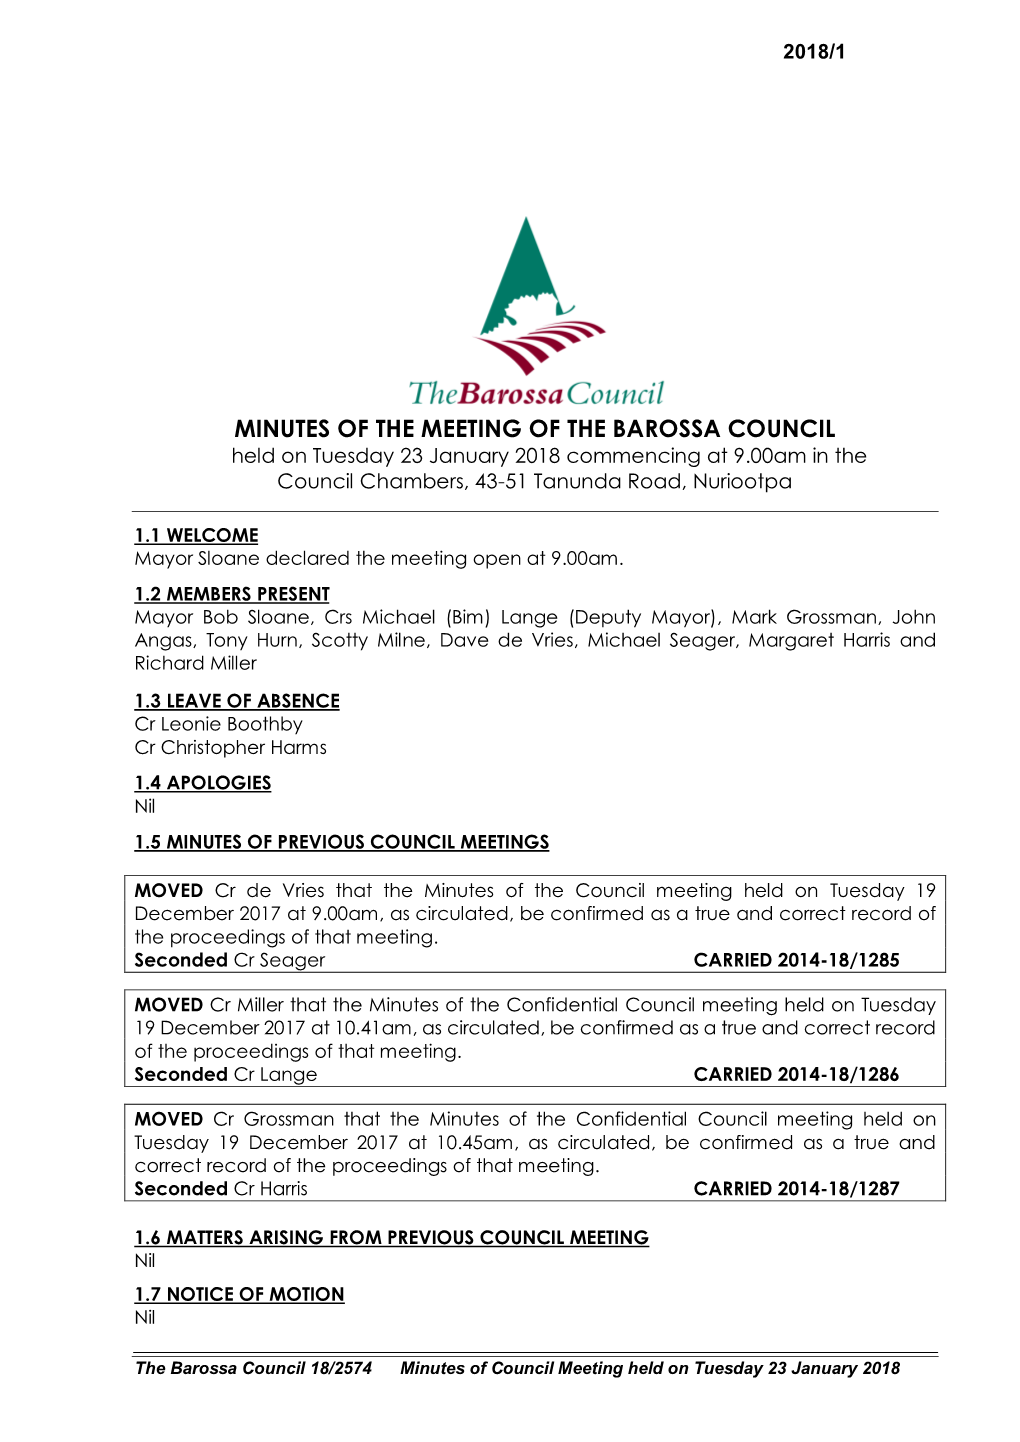 MINUTES of the MEETING of the BAROSSA COUNCIL Held on Tuesday 23 January 2018 Commencing at 9.00Am in the Council Chambers, 43-51 Tanunda Road, Nuriootpa